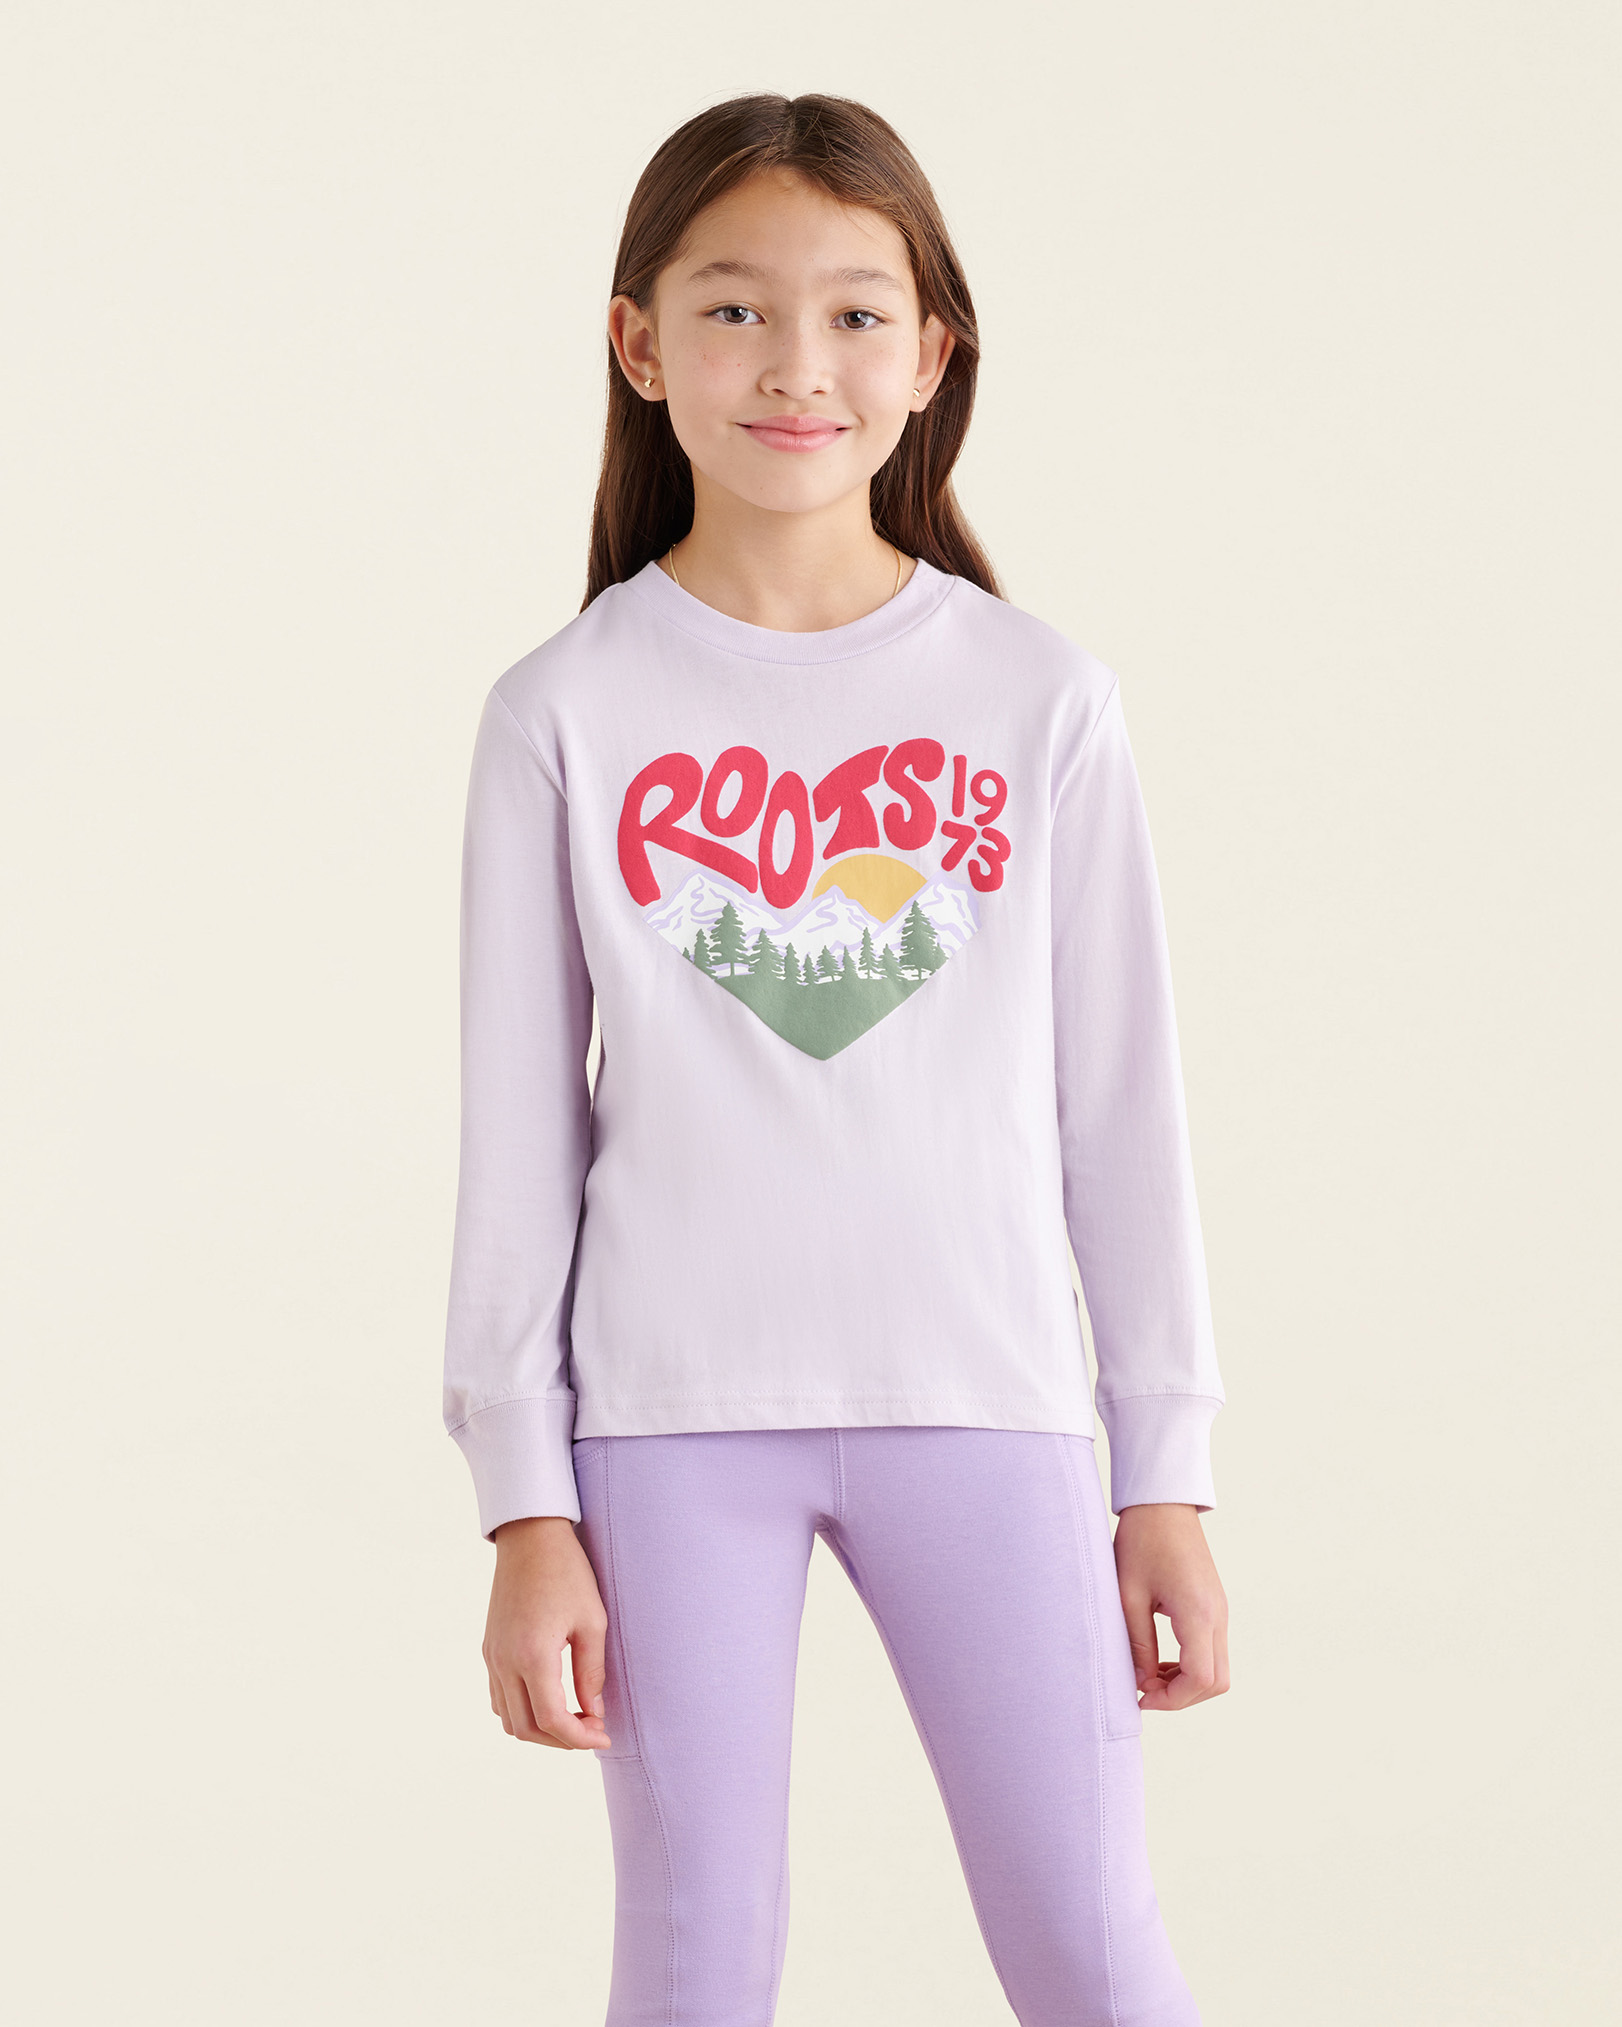 Roots Kids Great Outdoor T-Shirt in Orchid Petal